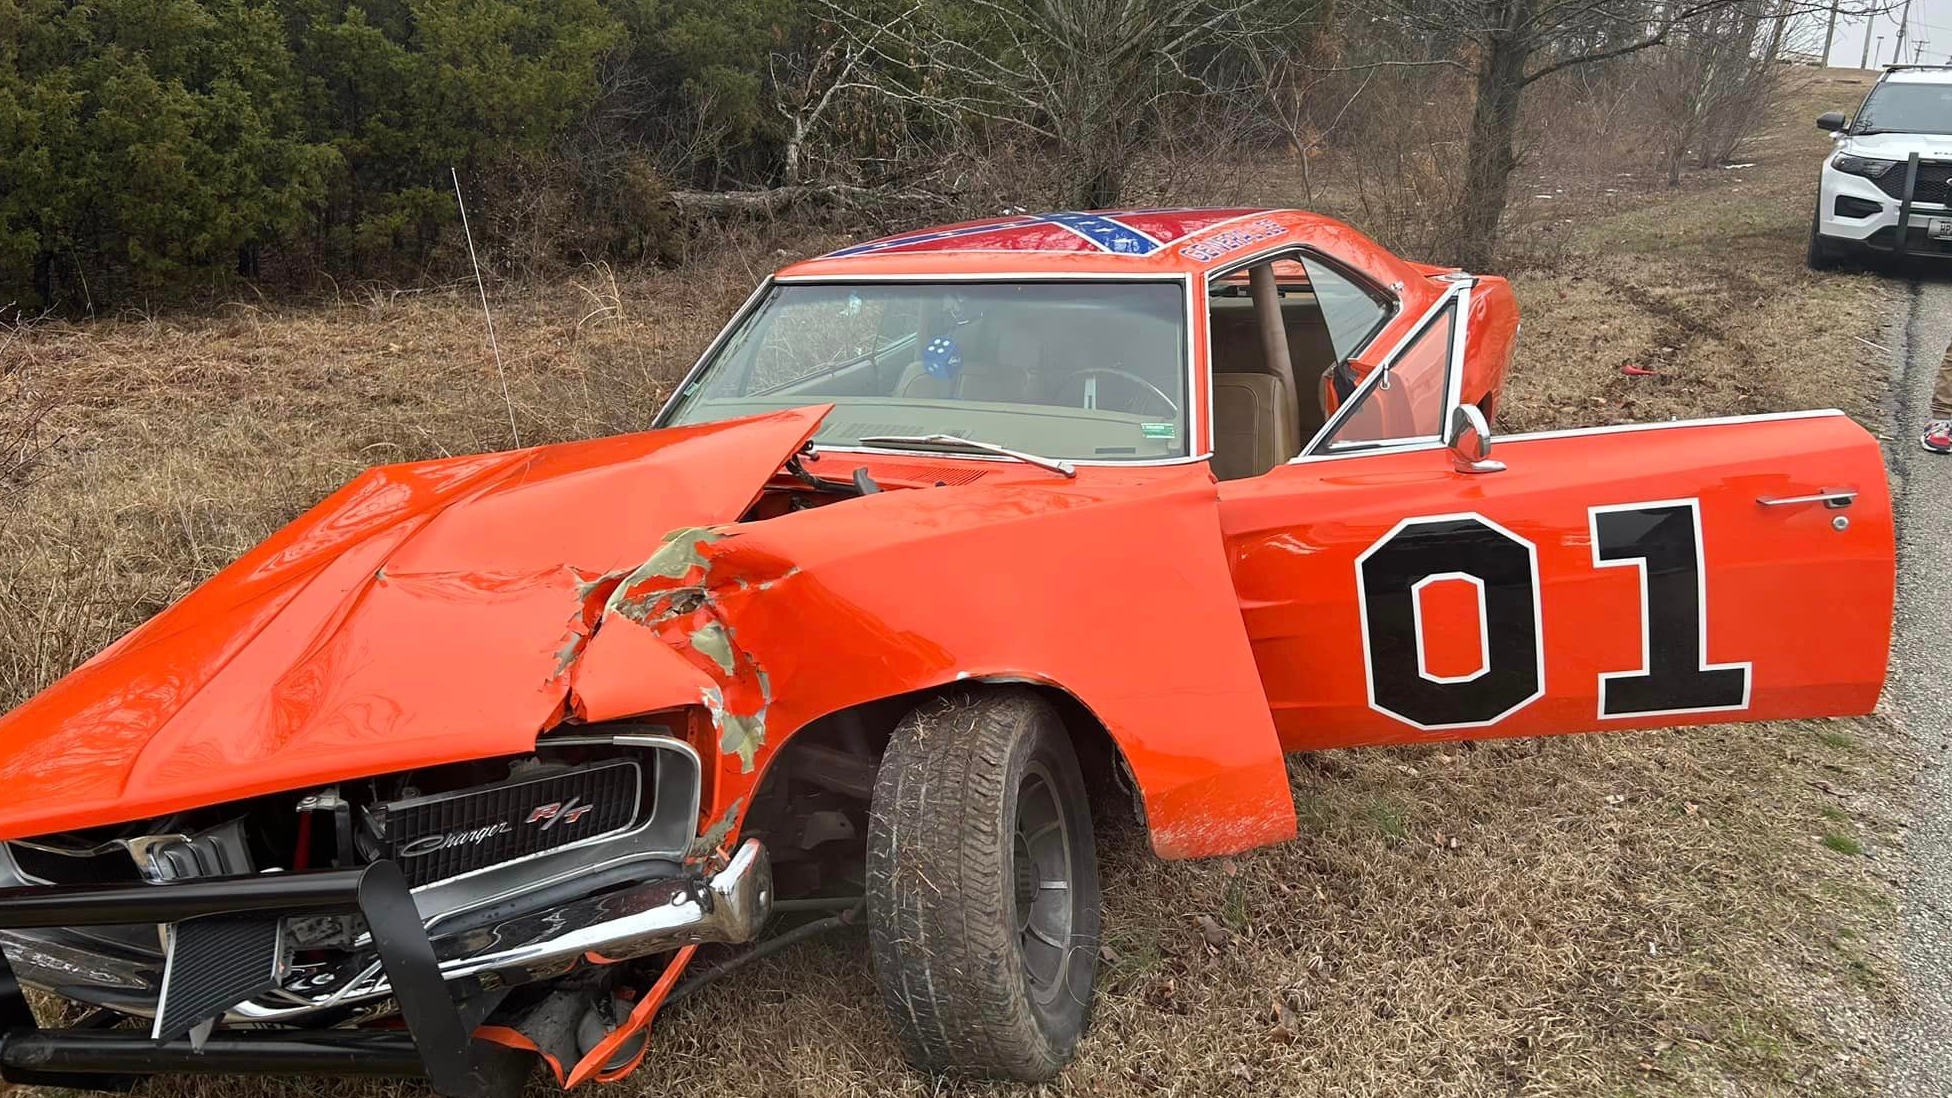 Replica 'Dukes of Hazzard' car involved in crash on the highway